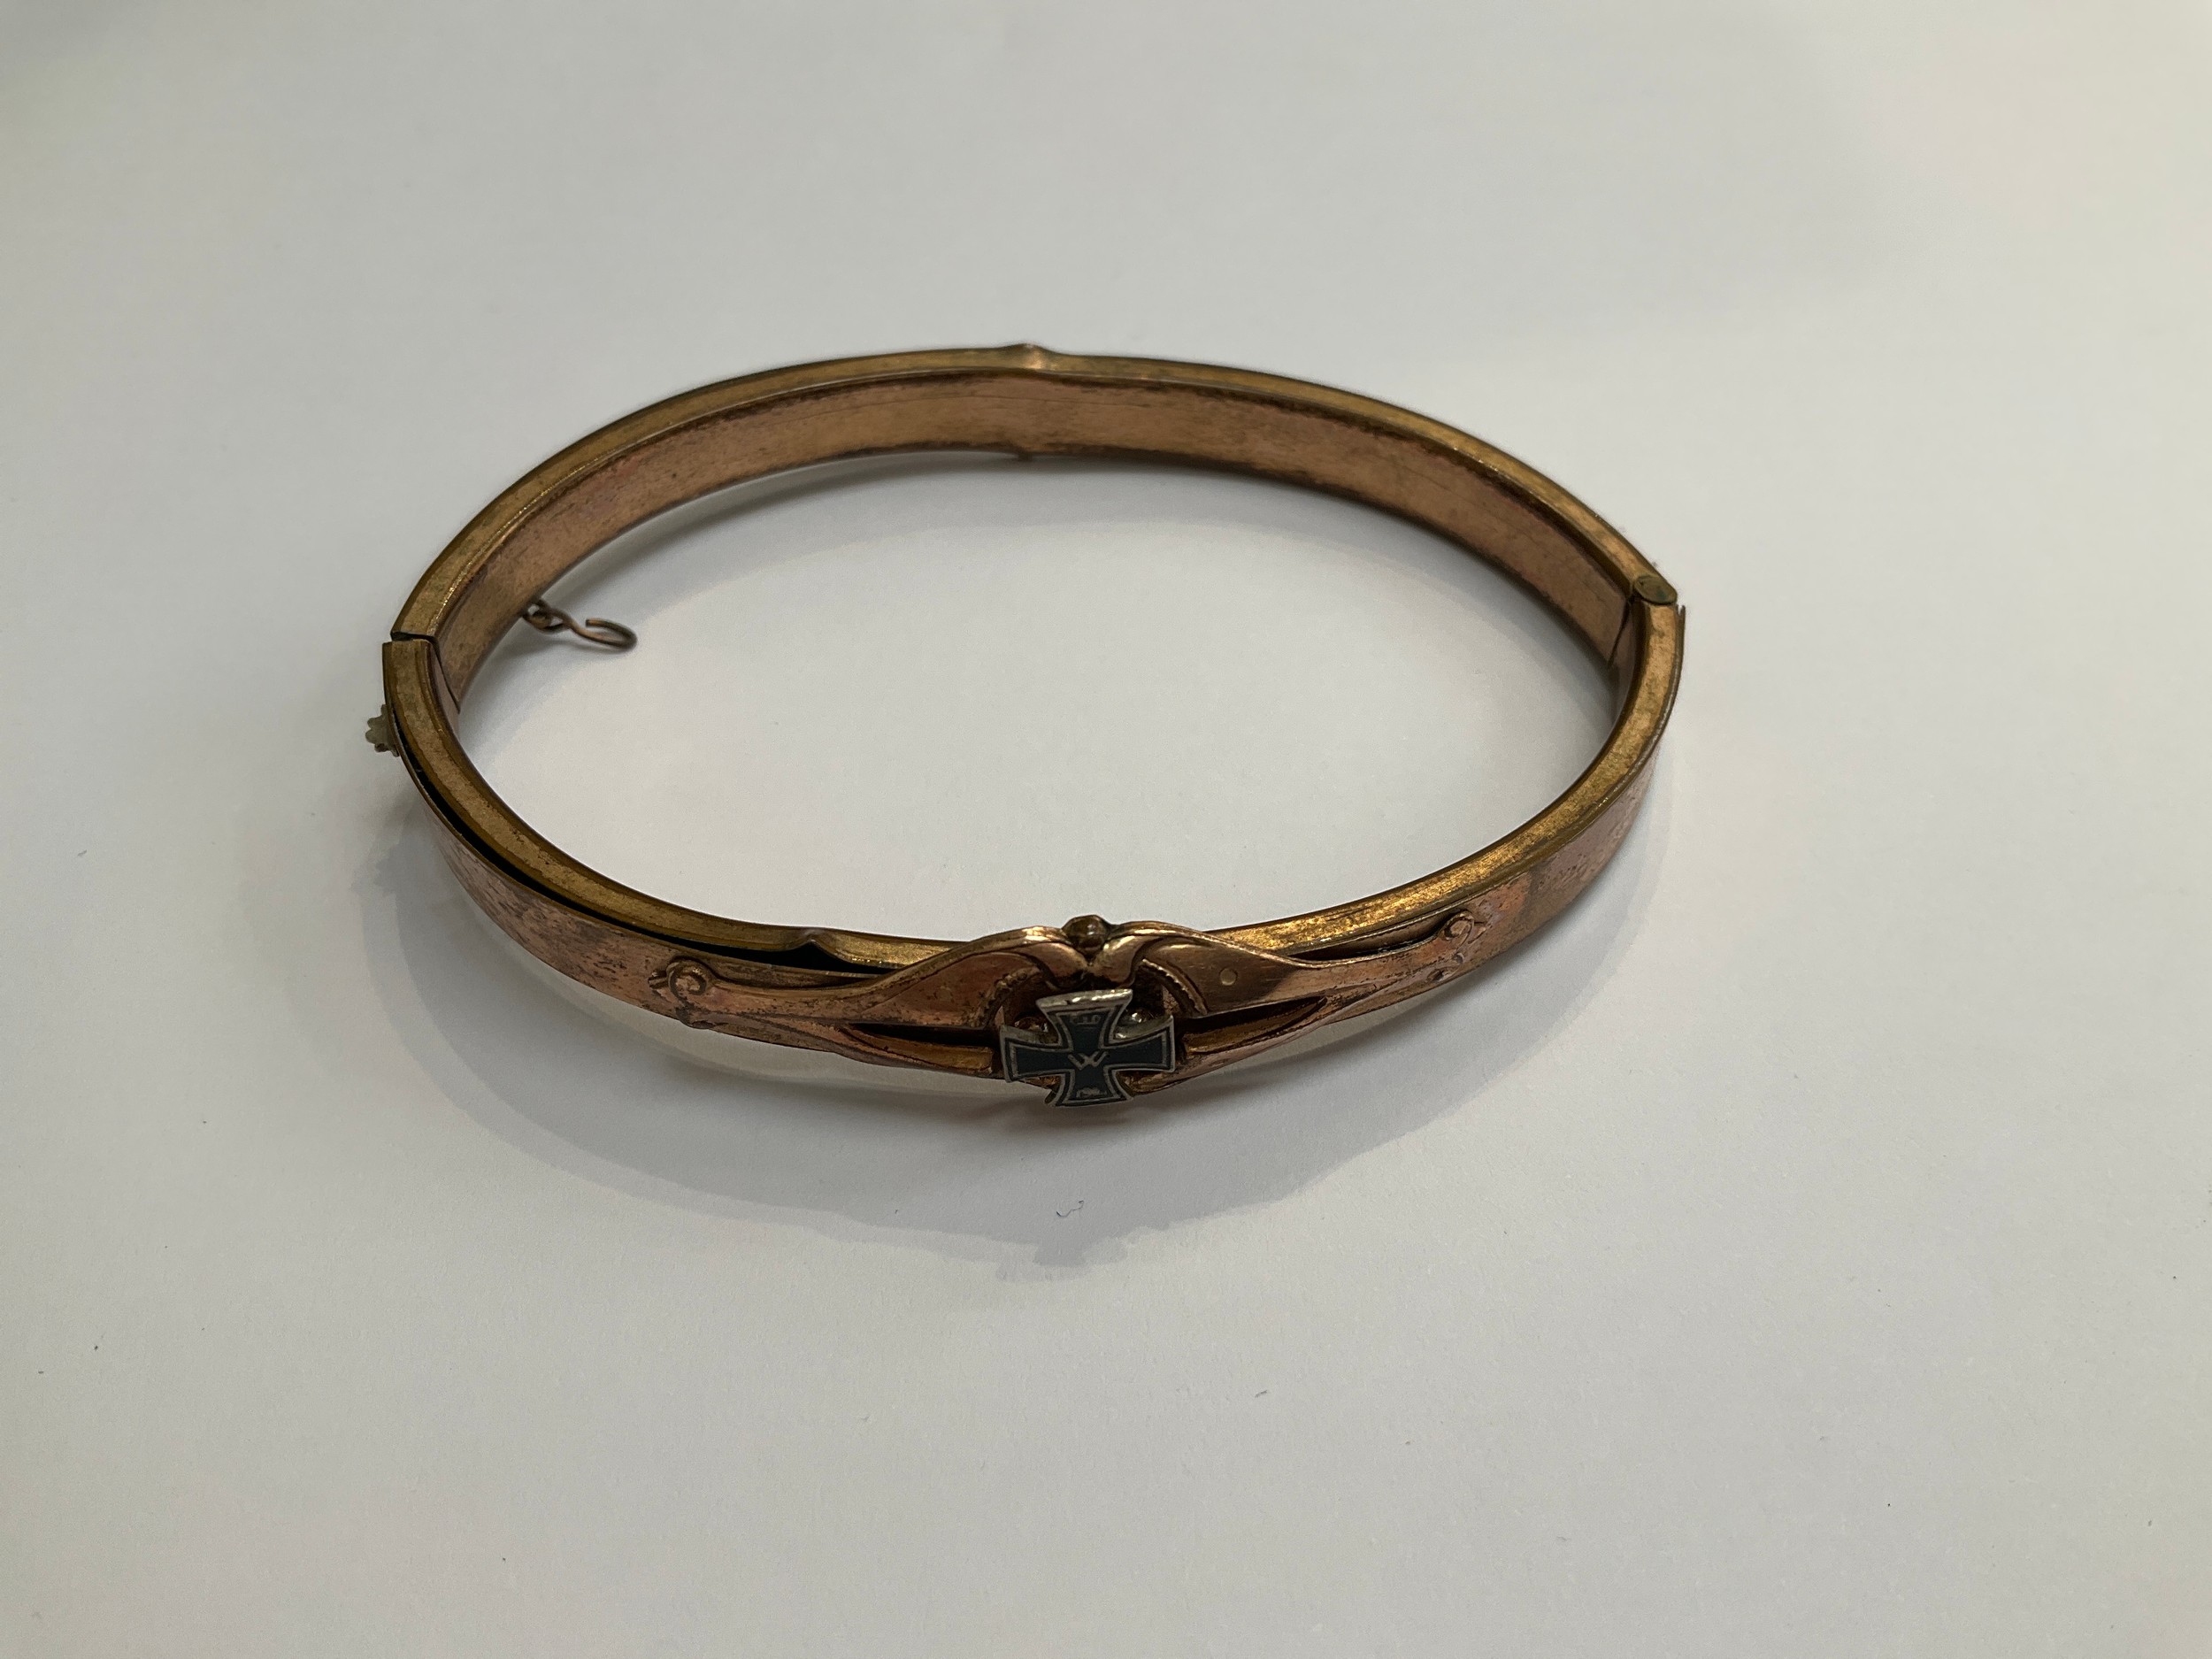 A German sweetheart bracelet with applied WWI Iron Cross detail, within a brown leather pouch